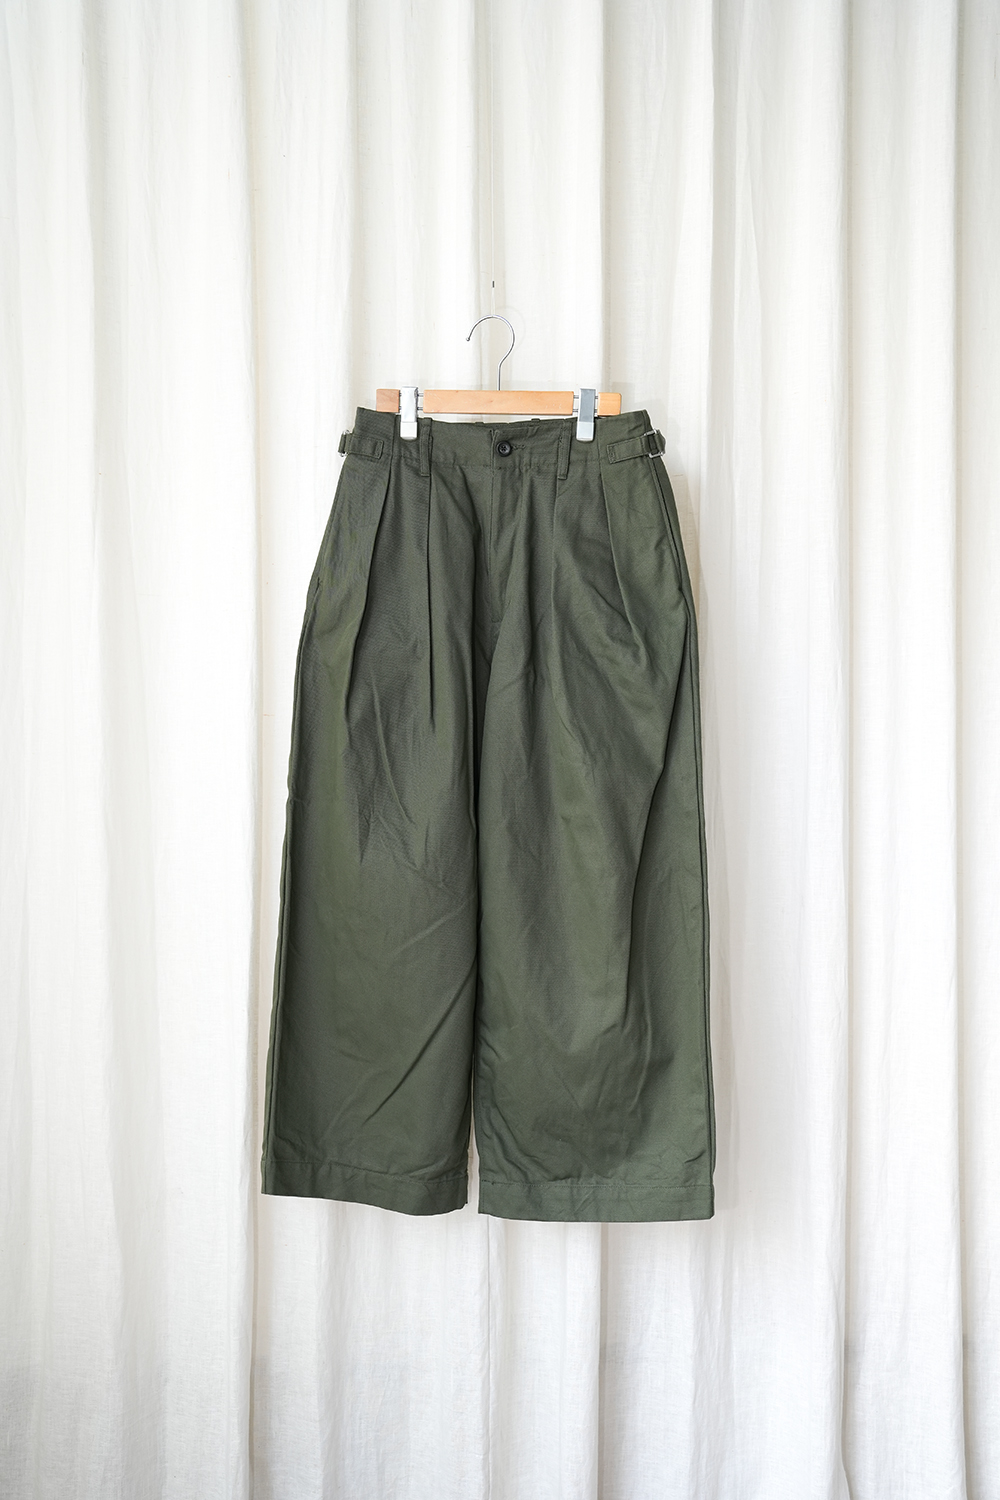 MILITARY CLOTH TUCK WIDE PANTS